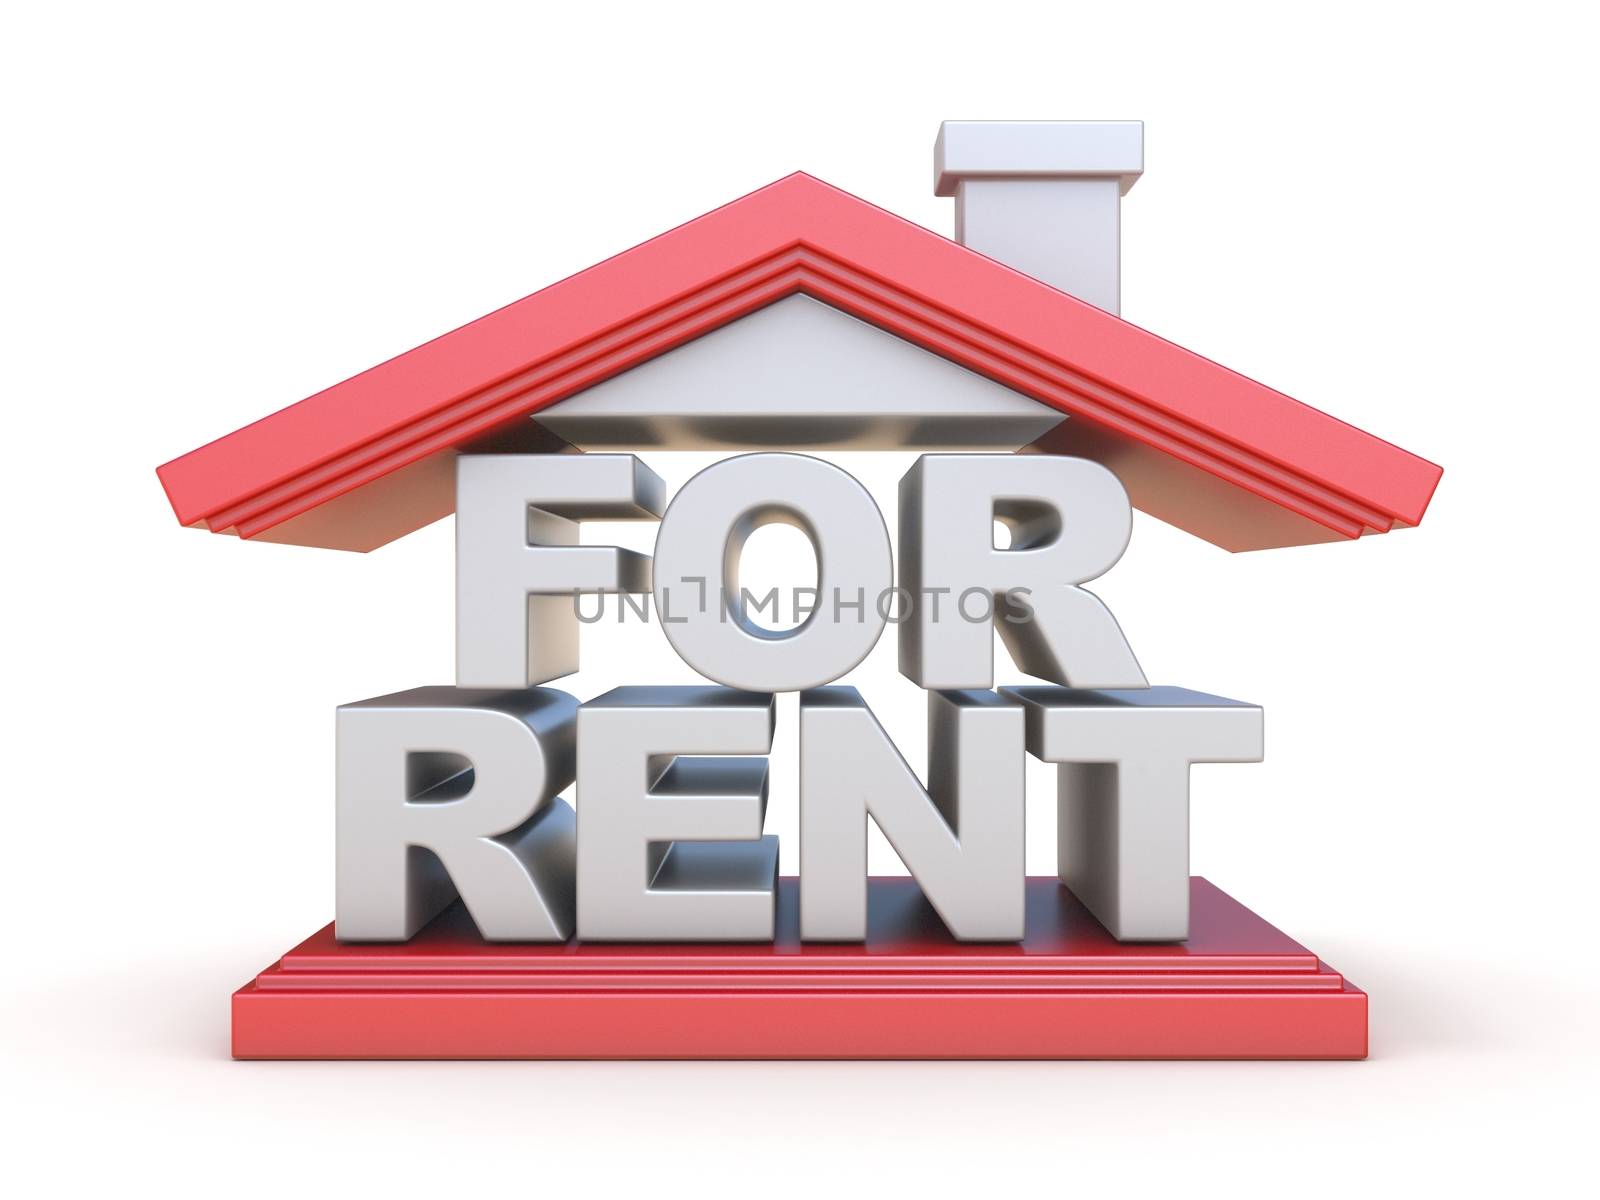 FOR RENT house sign front view 3D by djmilic